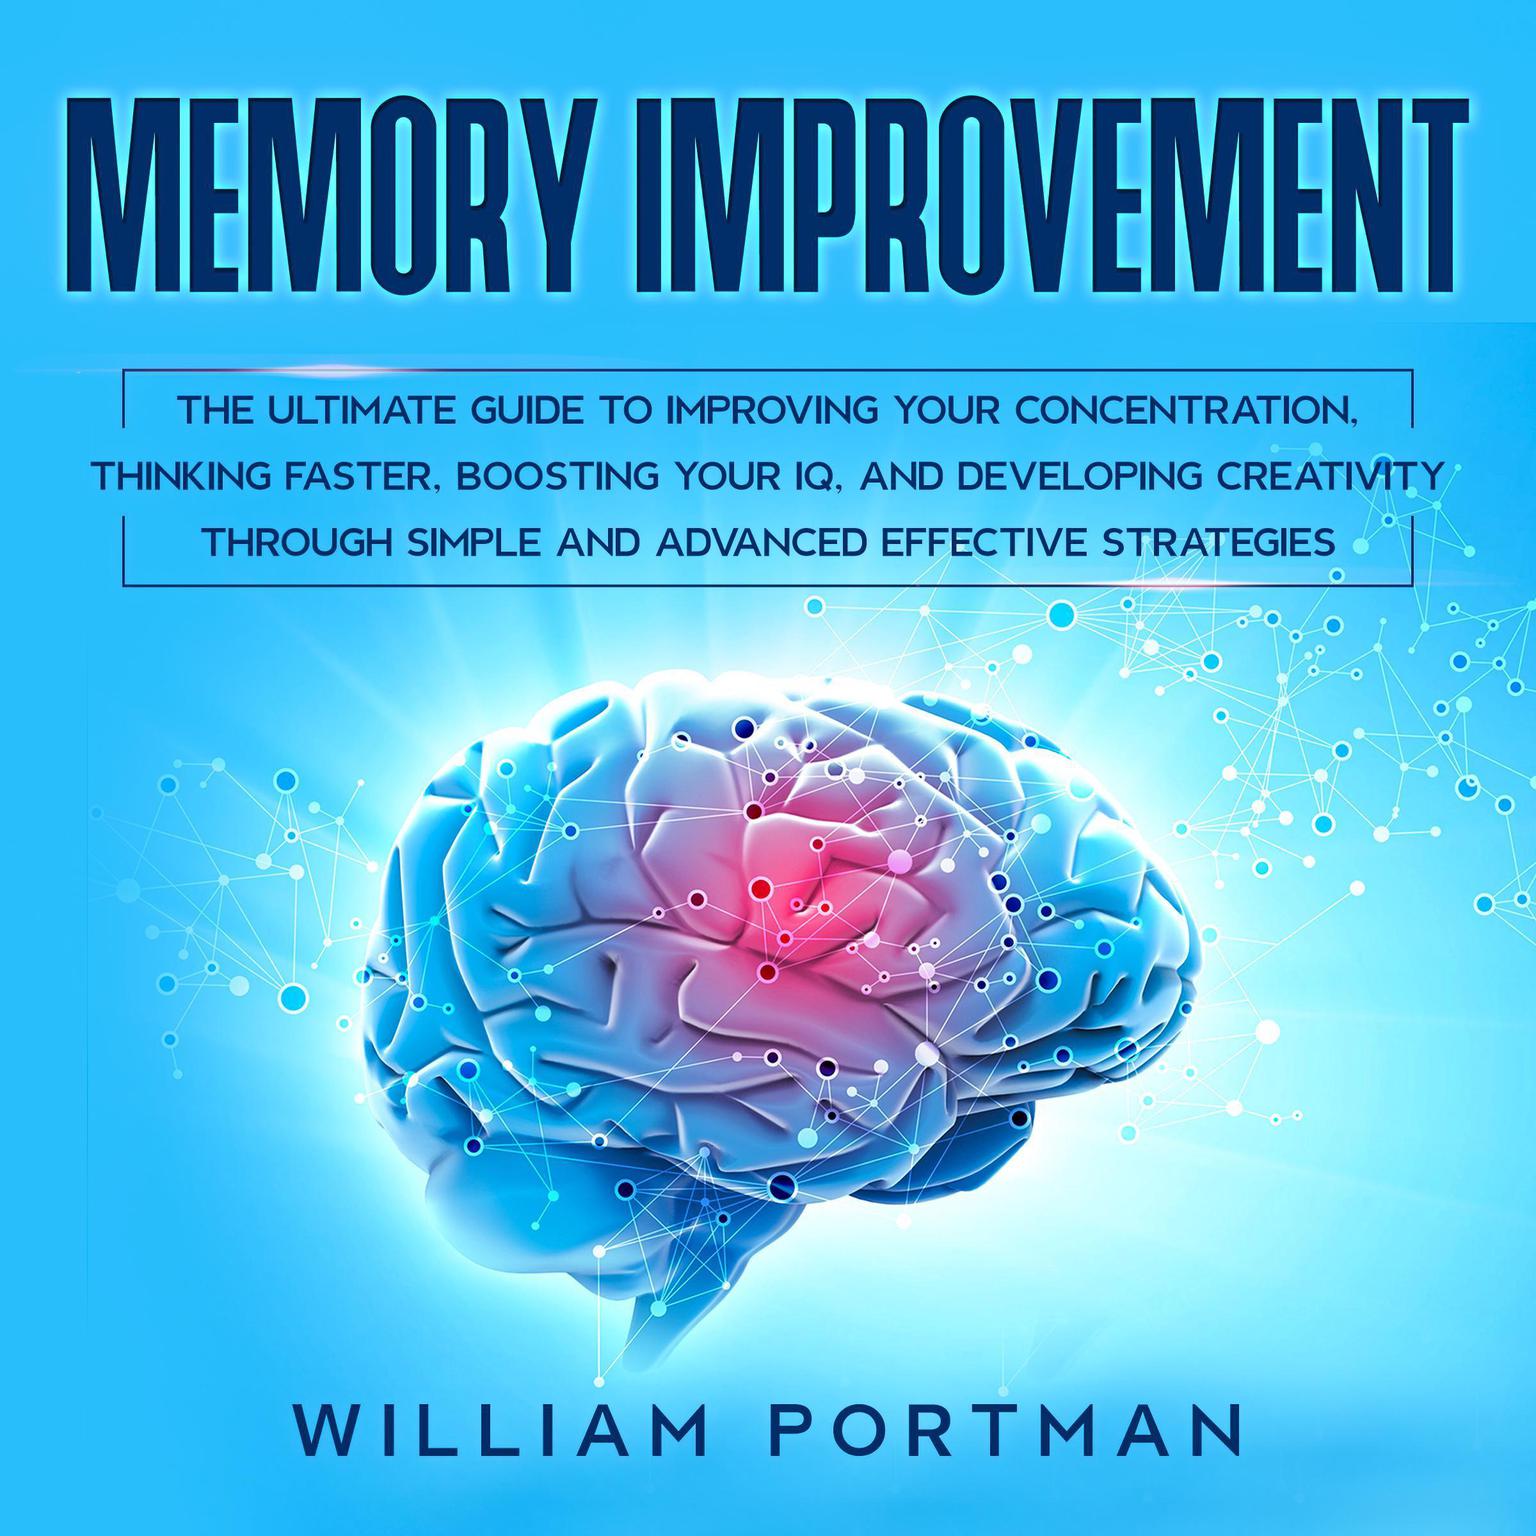 Memory Improvement: The Ultimate Guide to Improving Your Concentration, Thinking Faster, Boosting Your IQ, and Developing Creativity through Simple and Advanced Effective Strategies Audiobook, by William Portman